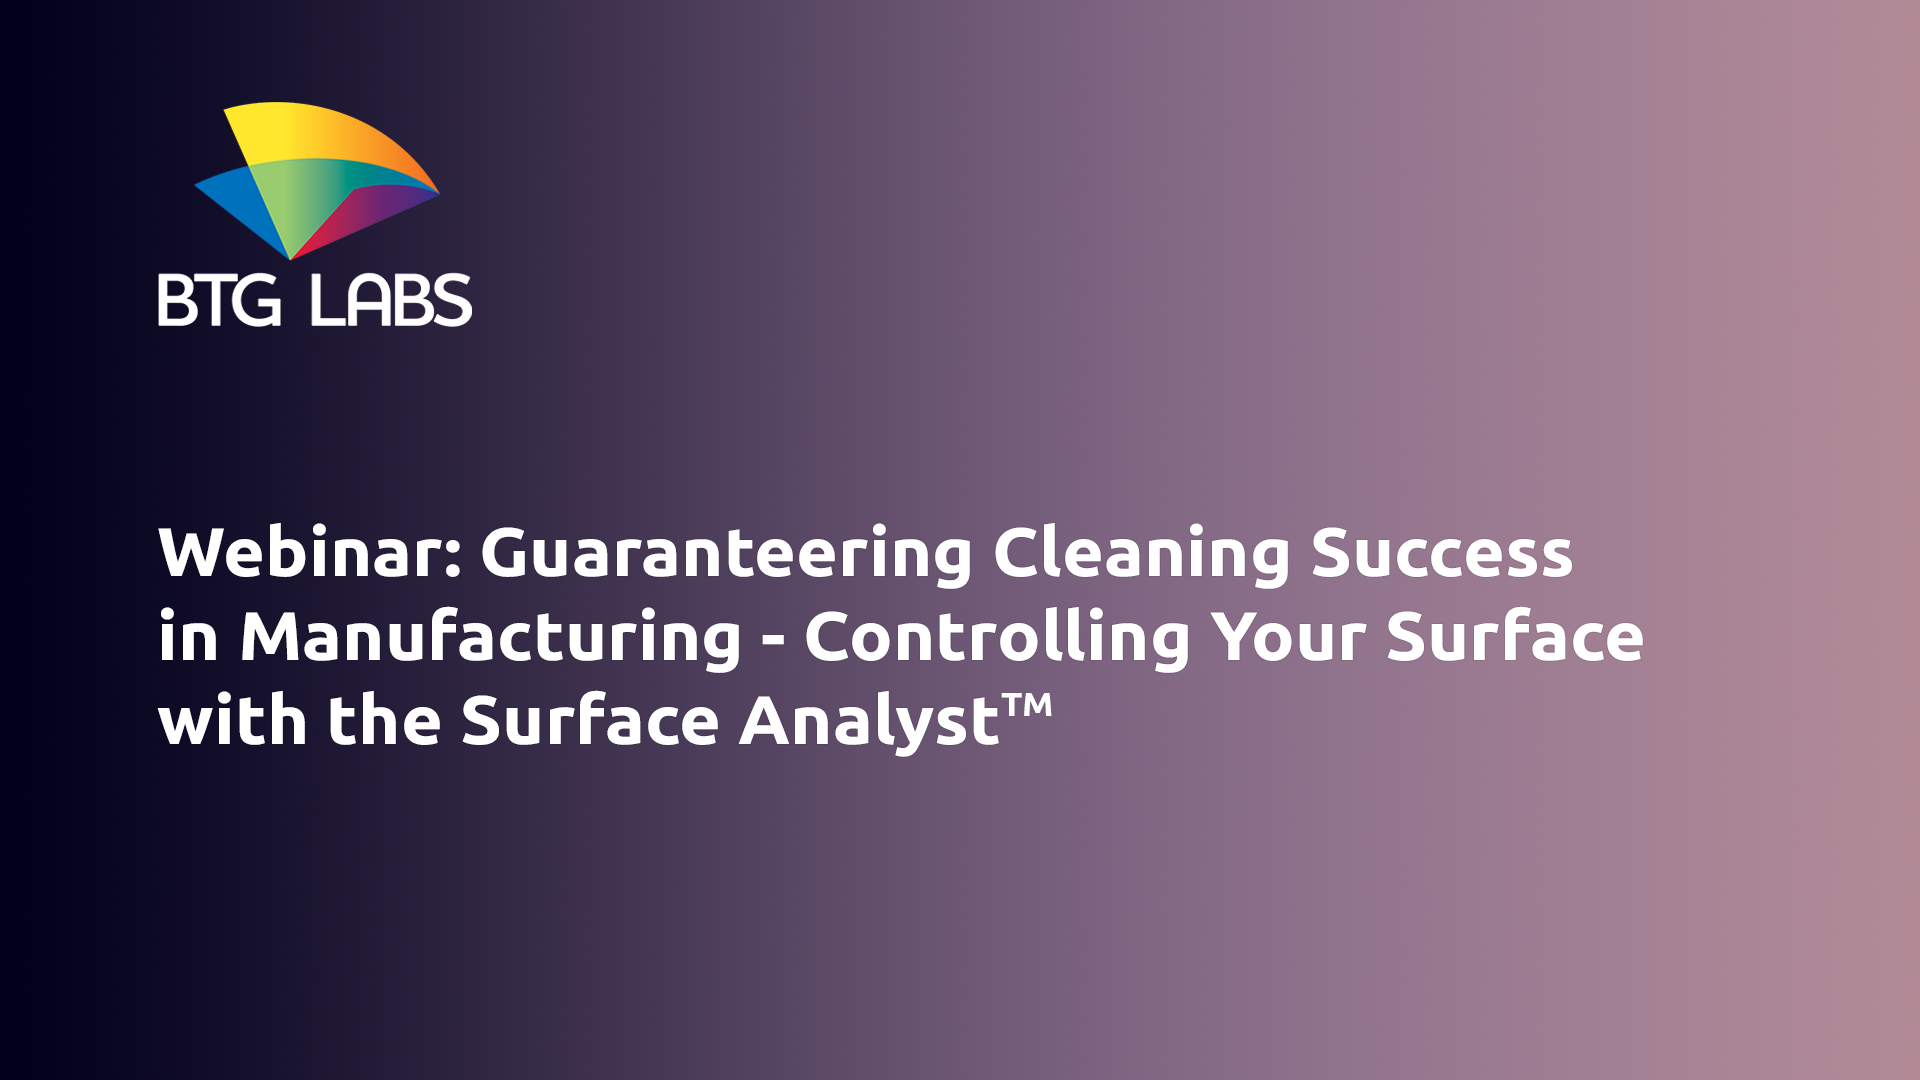 Webinar: Guaranteeing Cleaning Success in Manufacturing, Controlling your Surface with the Surface Analyst